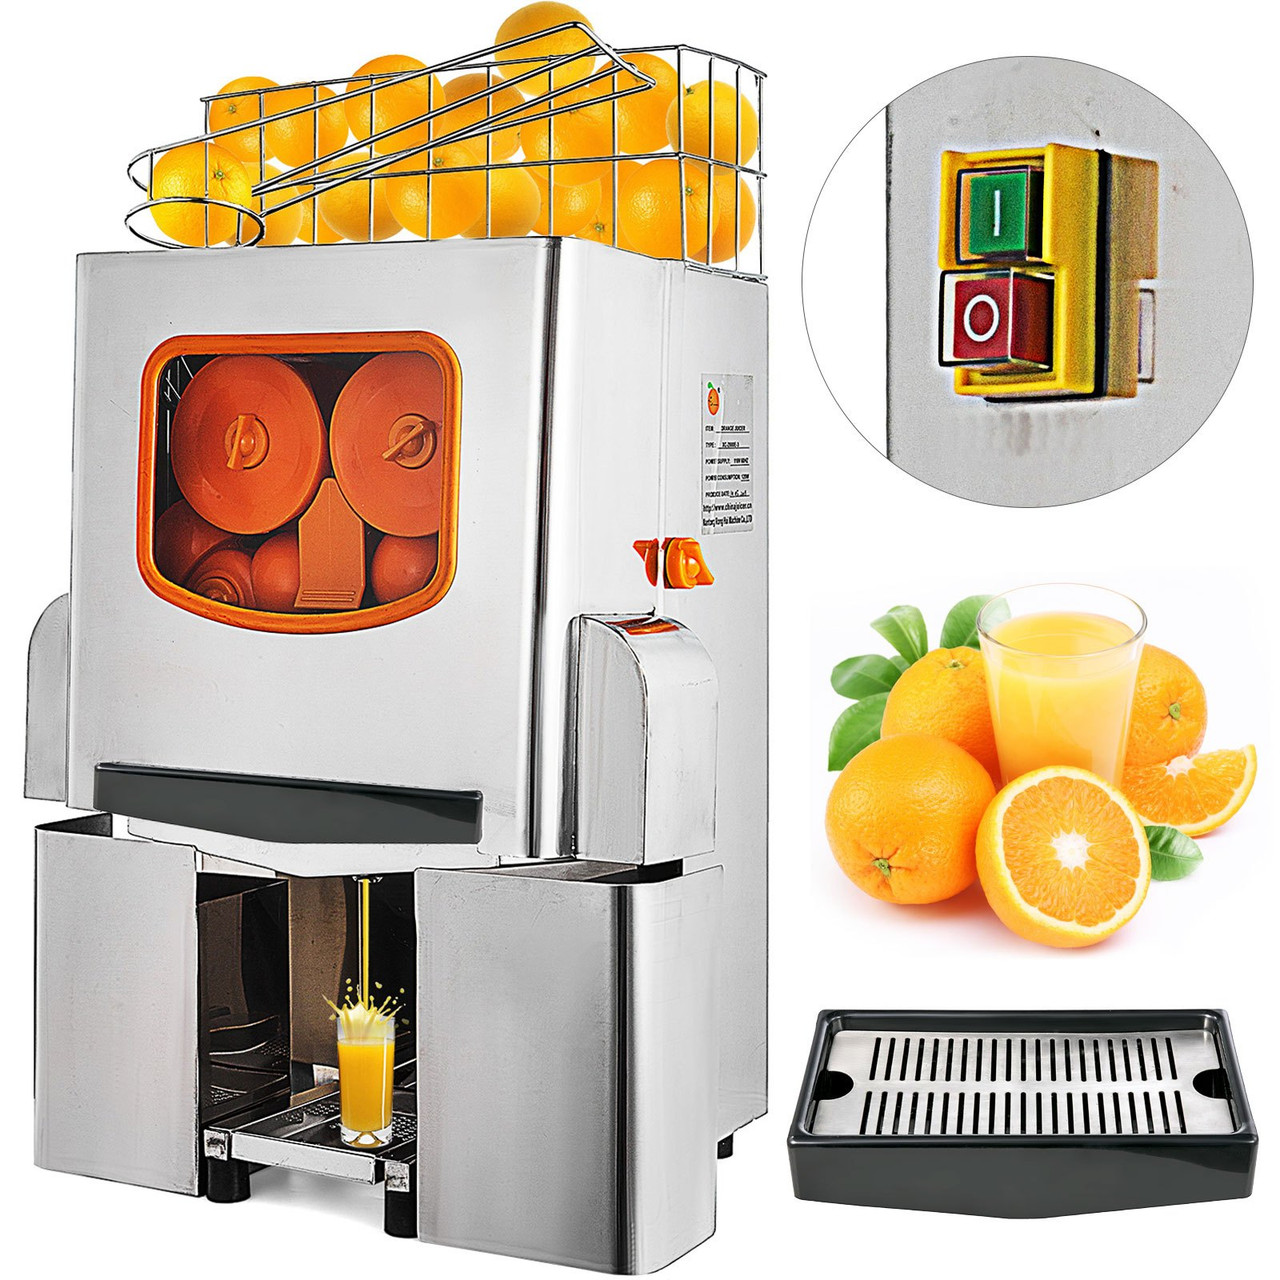 VEVOR Commercial Wheatgrass Juicing Machine, 80% Juice Yield, Slow